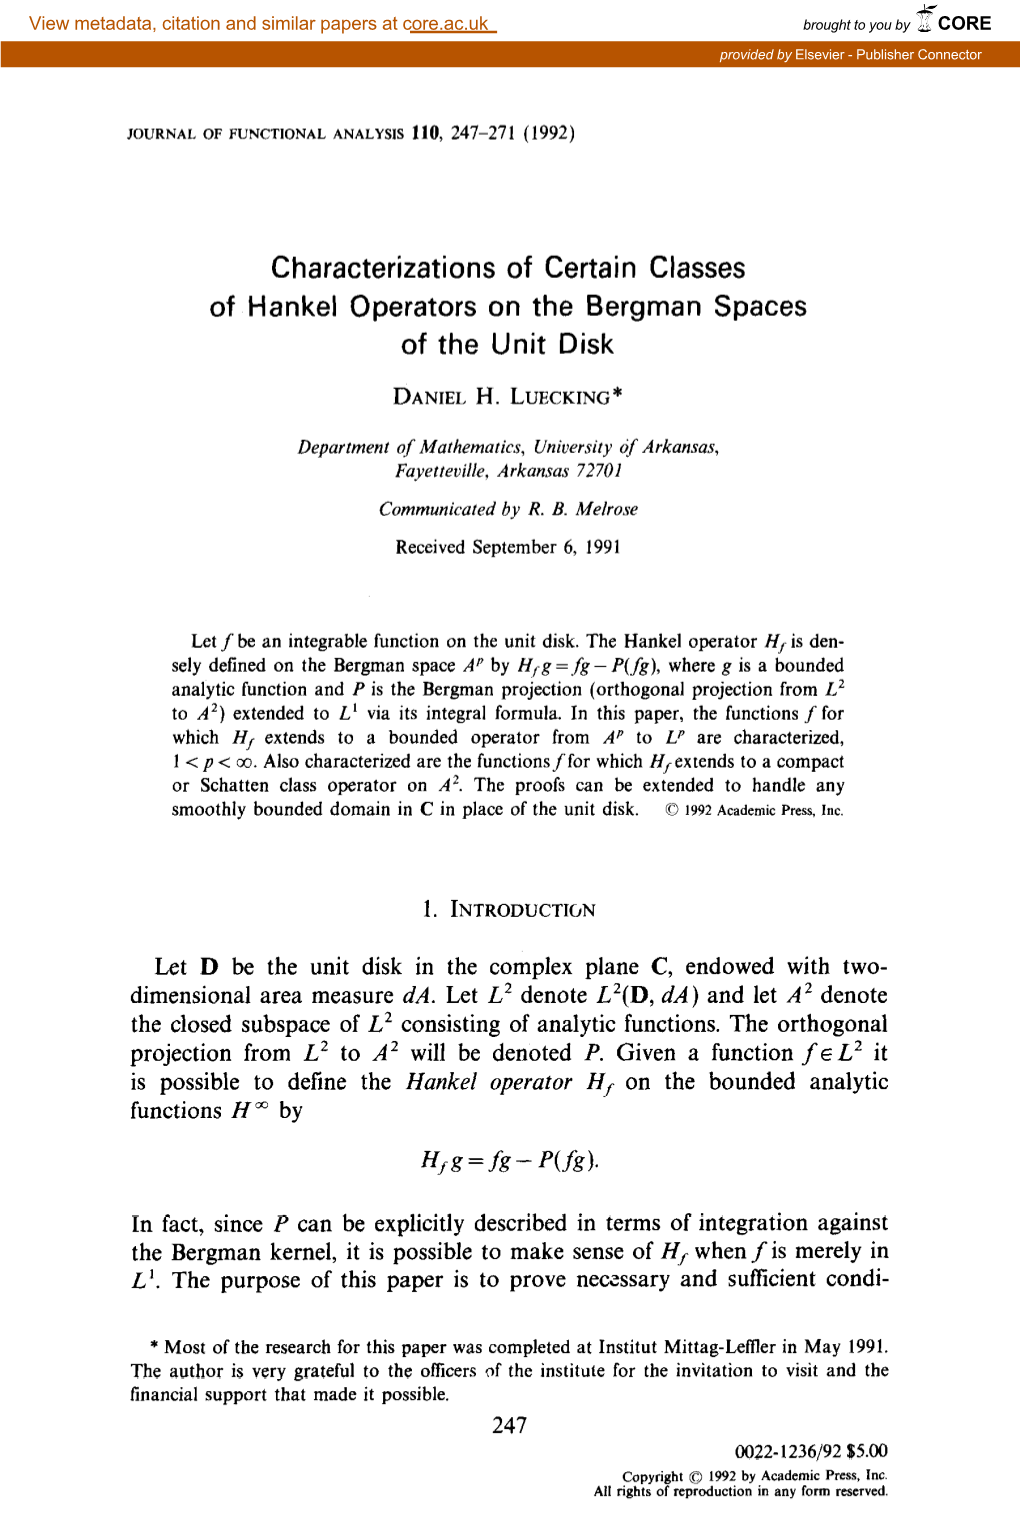 Characterizations of Certain Classes of Hankel Operators on the Bergman Spaces of the Unit Disk